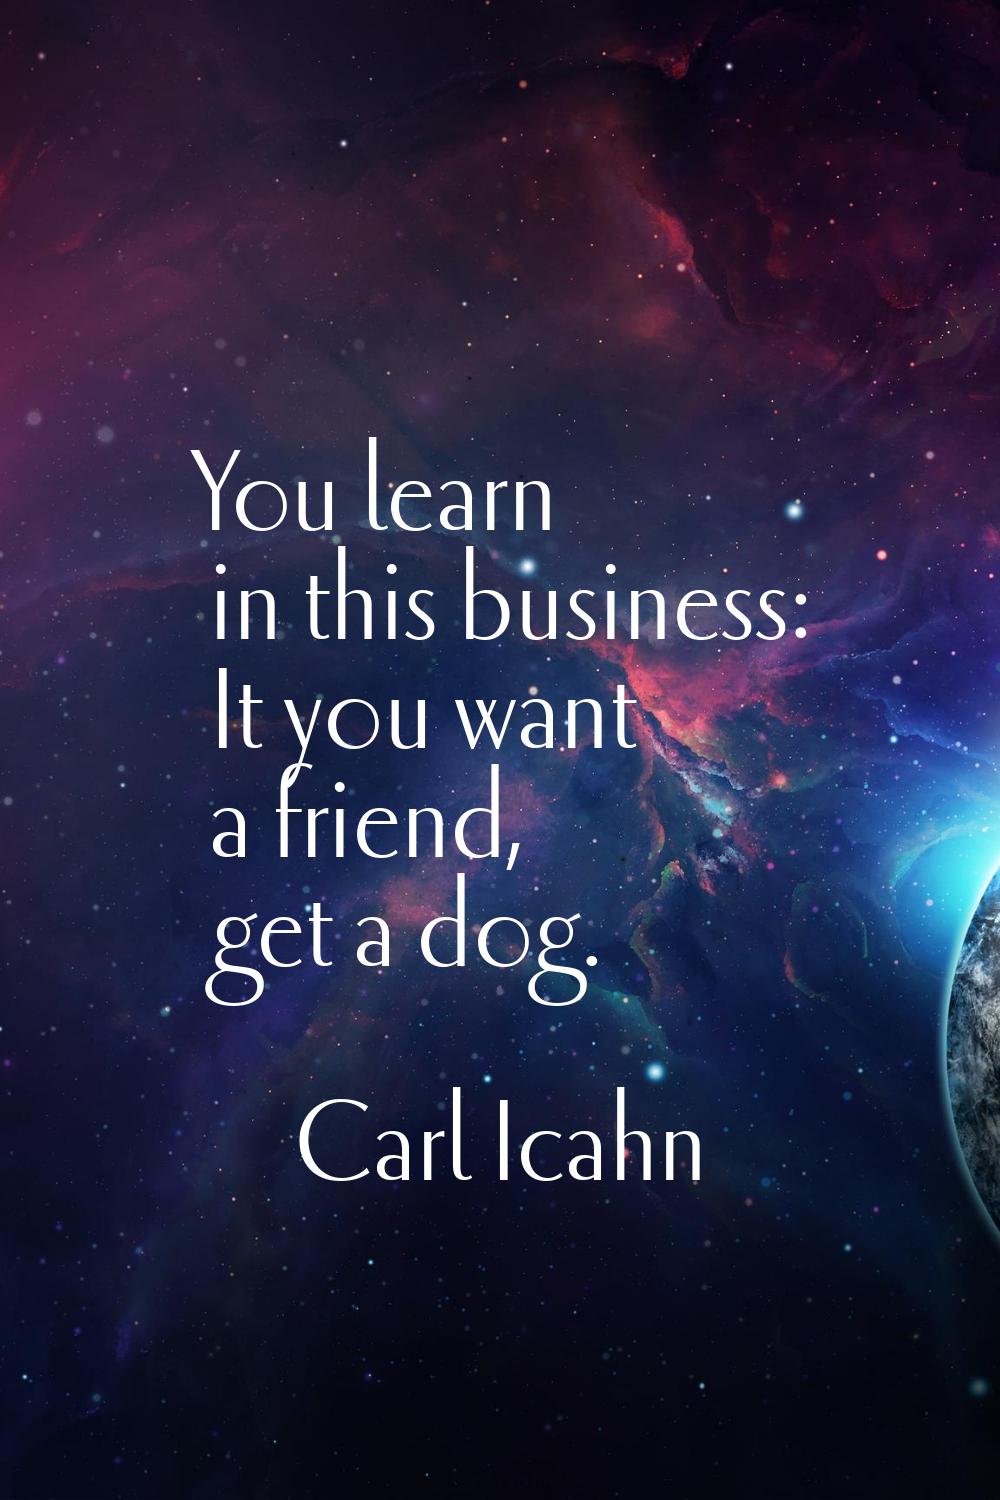 You learn in this business: It you want a friend, get a dog.